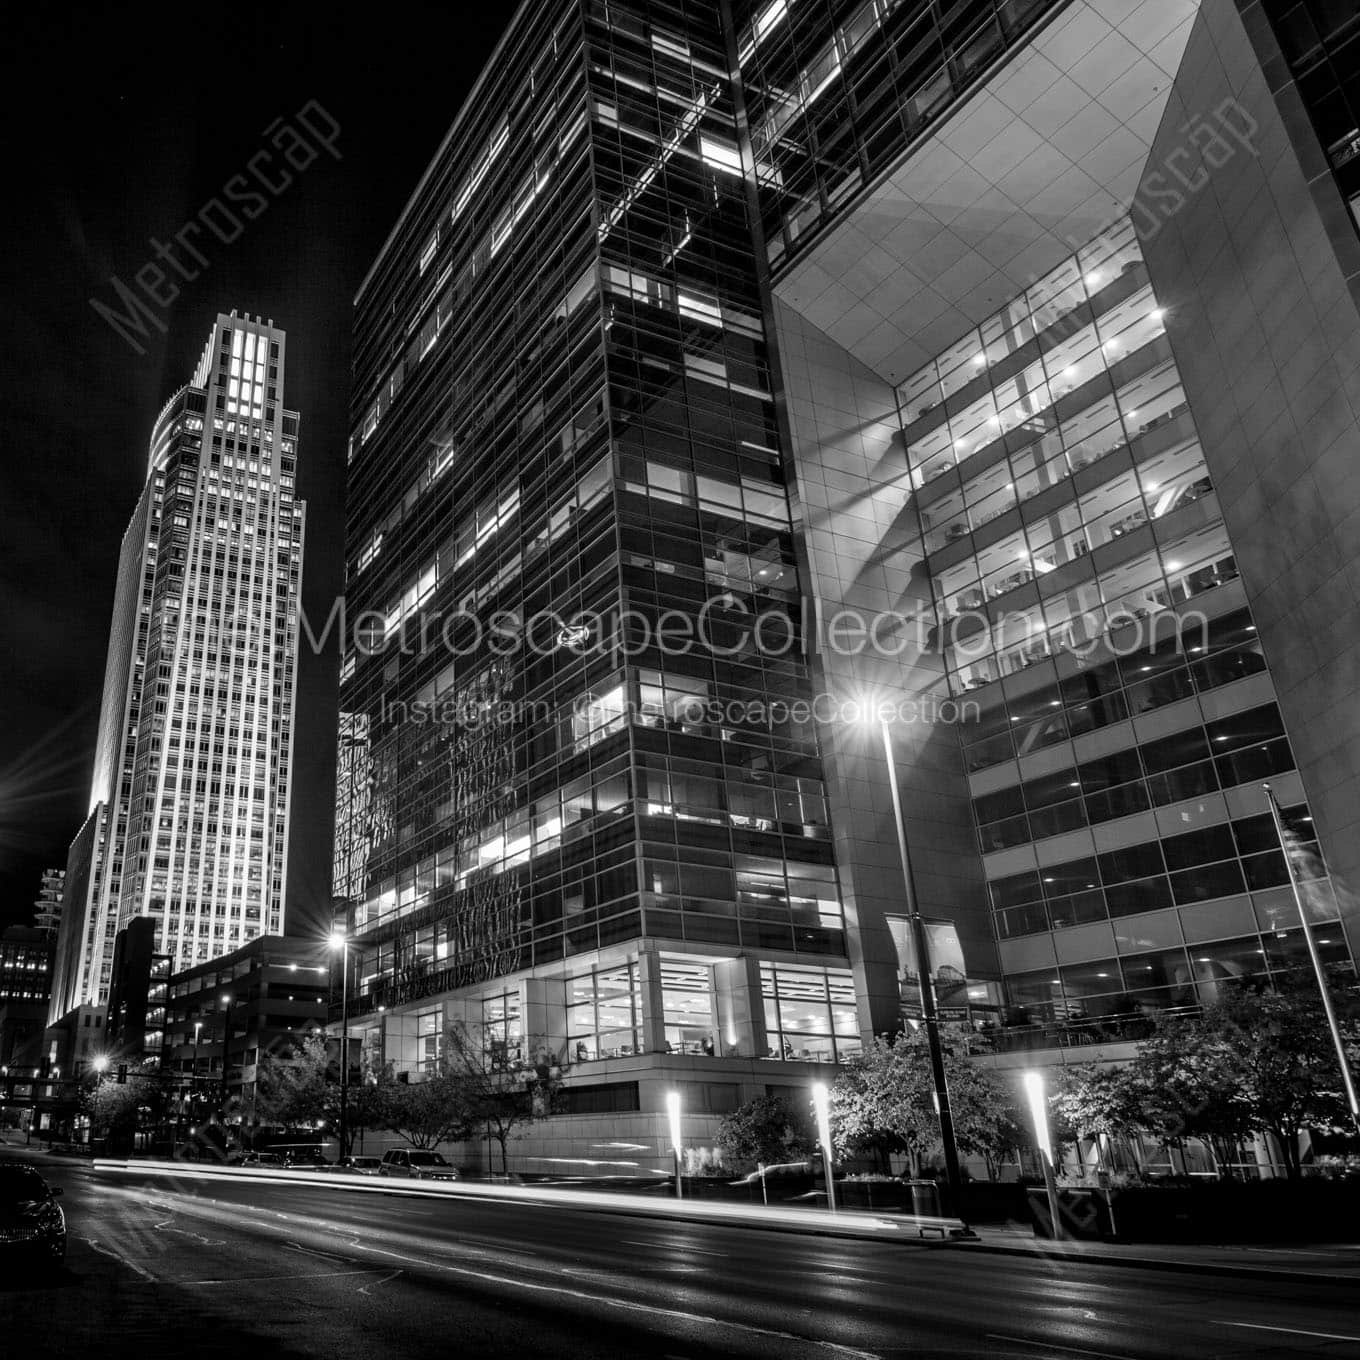 1st national building and union pacific building Black & White Office Art